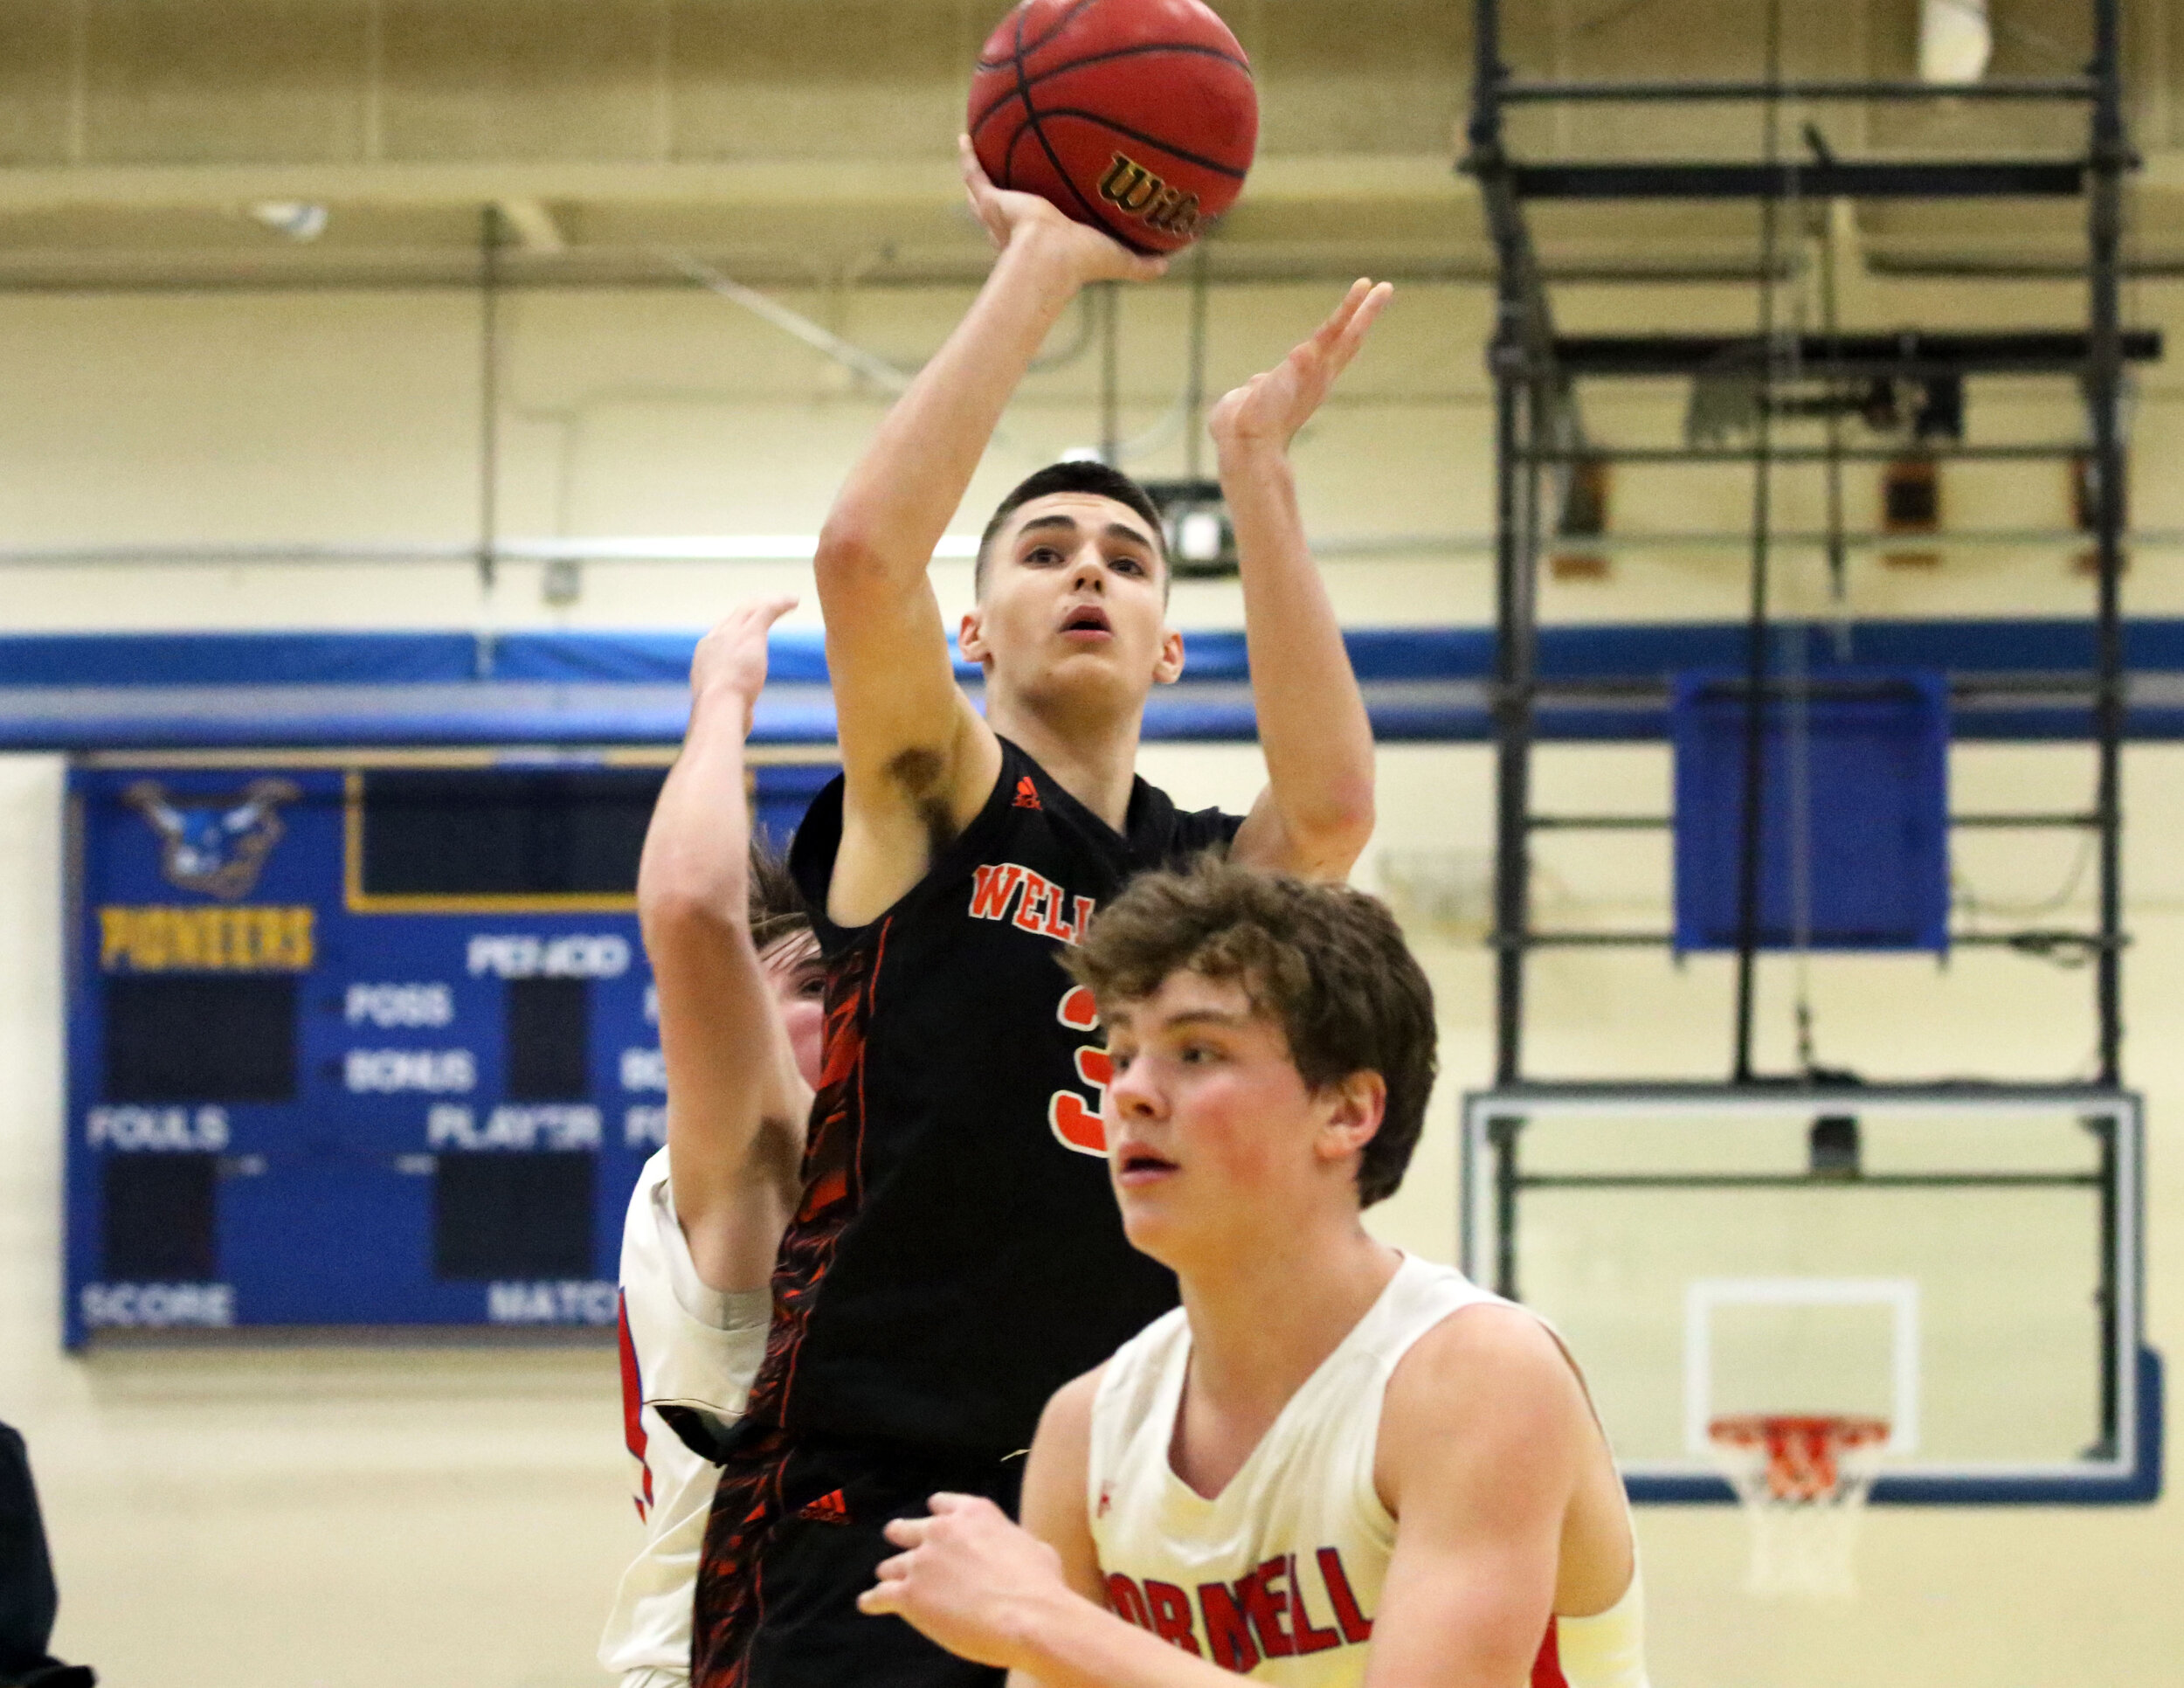  Wellsville senior Max Jusianiec (3) puts up a shot from inside the arc against the Hornell defense during Friday night’s clash in the Barkley Showcase at Alfred State College. [Chris Brooks/WellsvilleSports.com] 